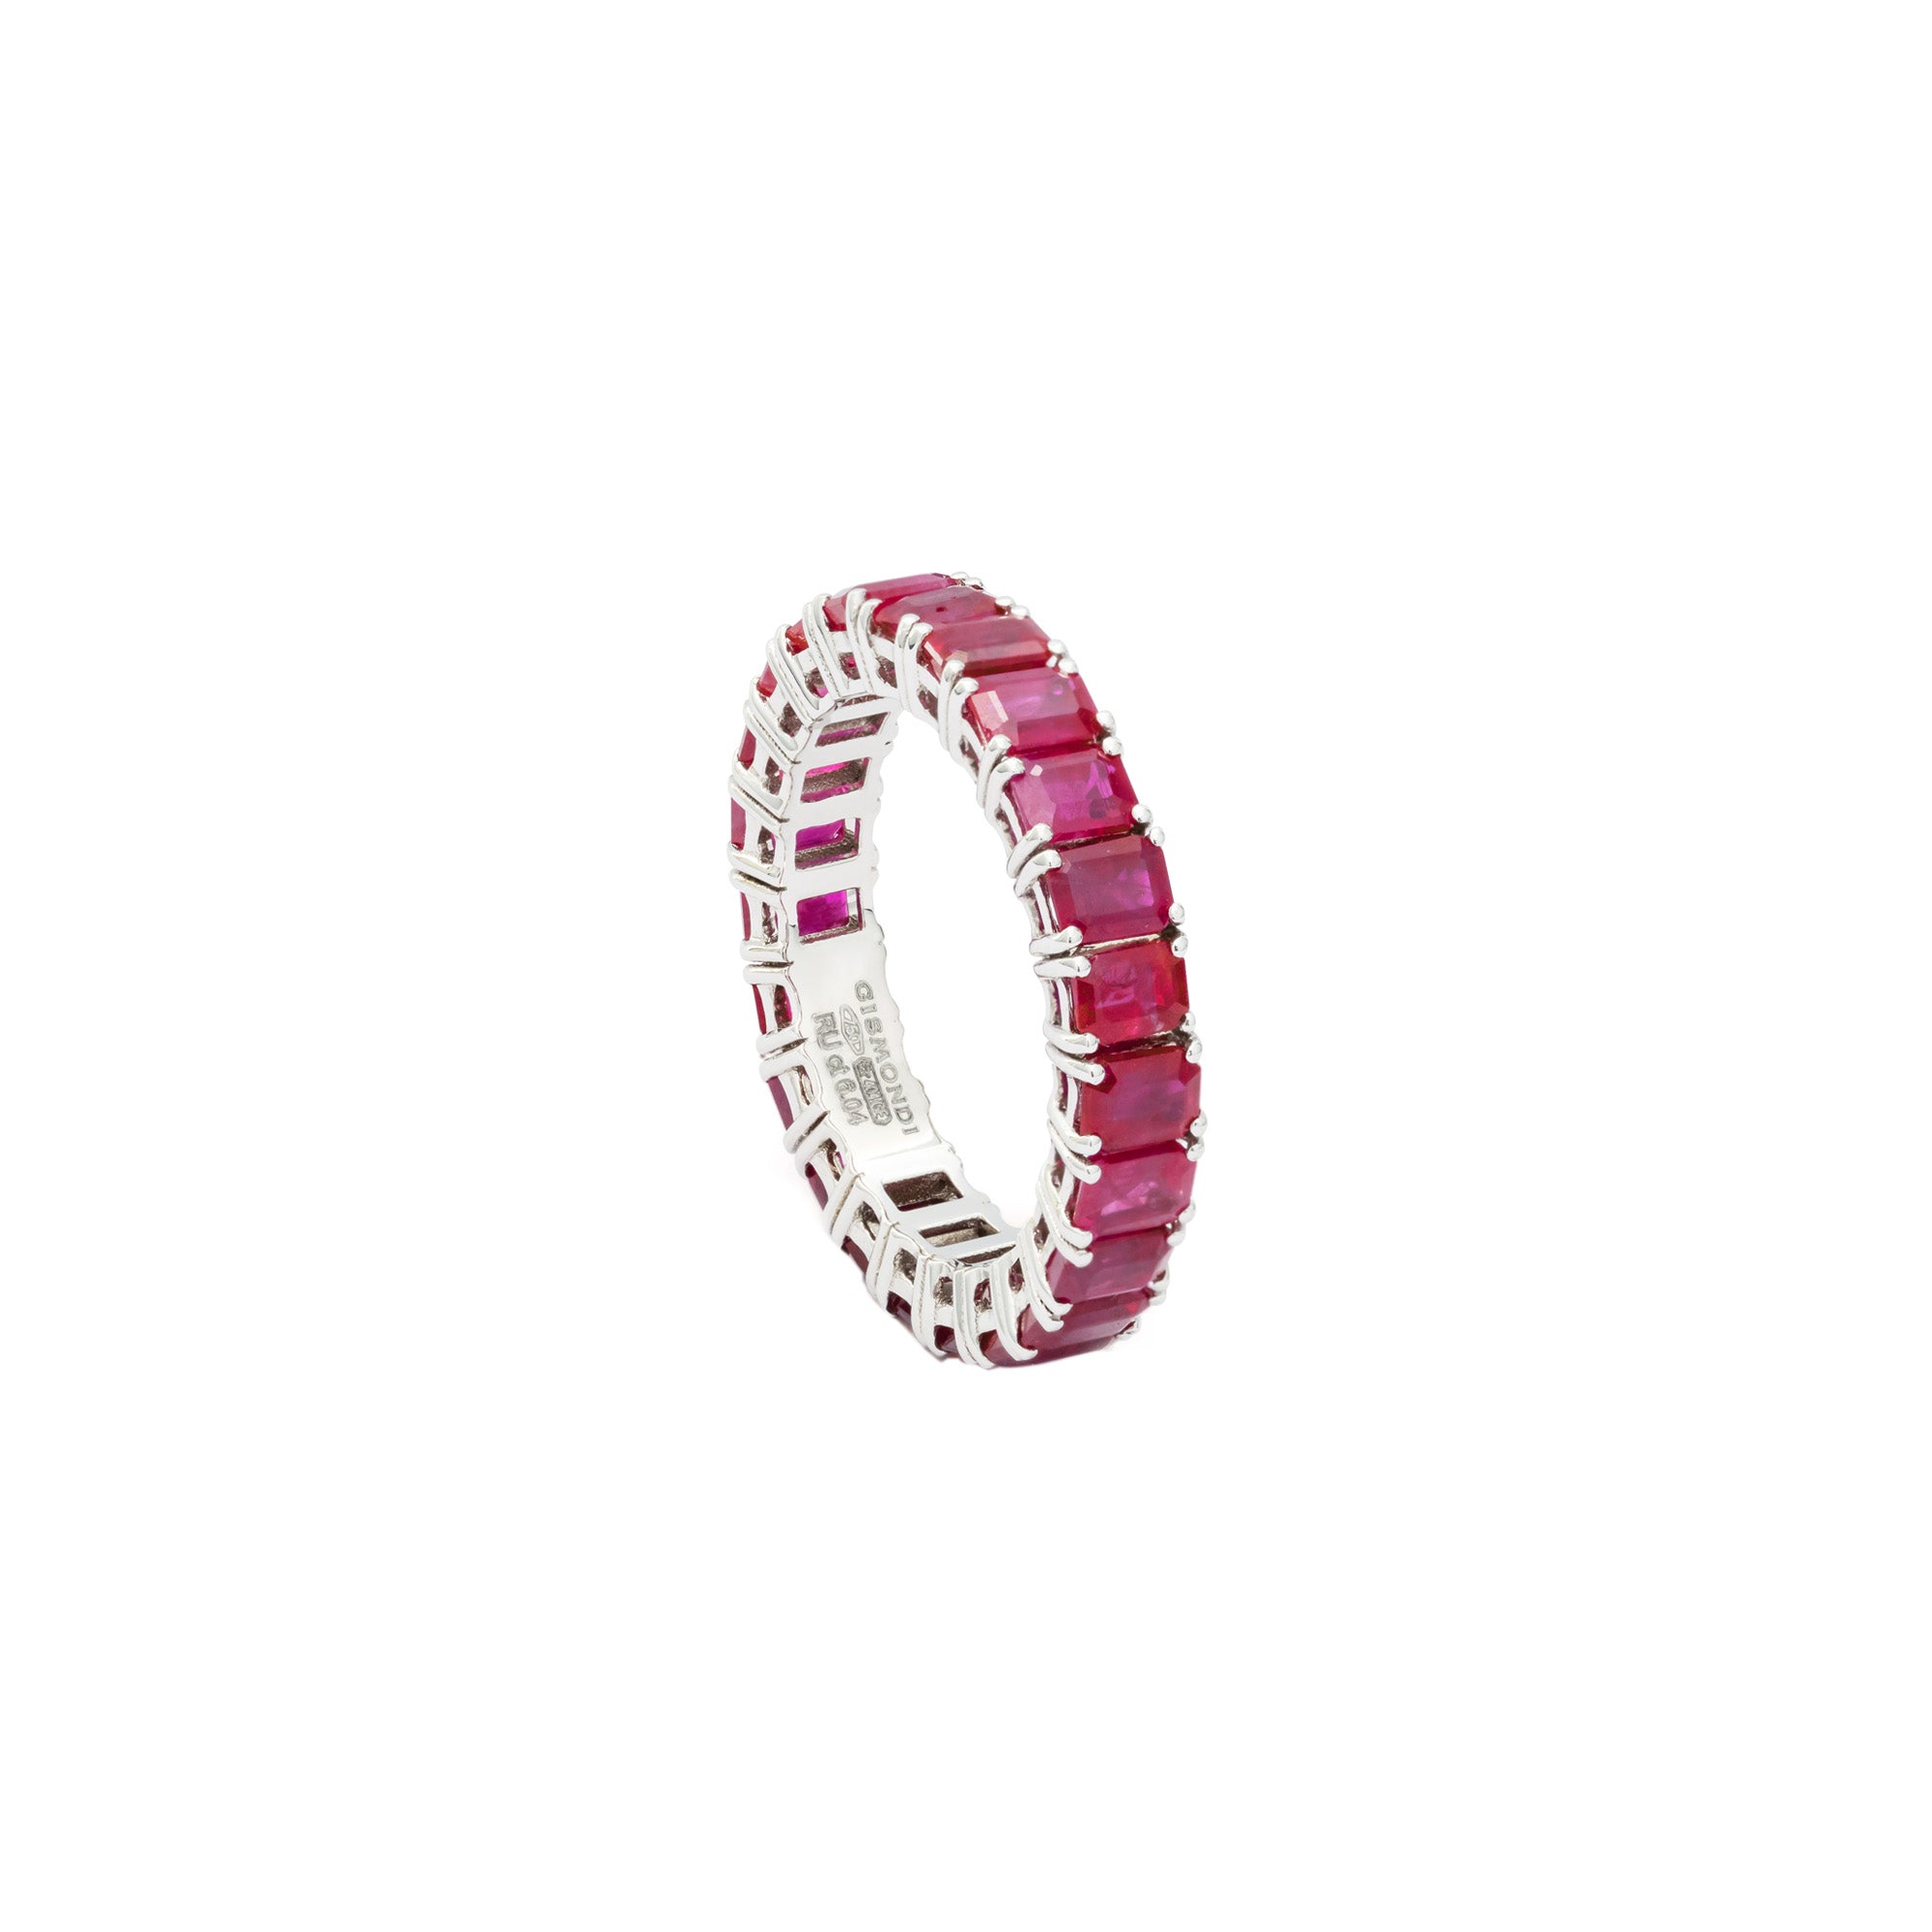 Pace White Gold Ring With Rubies